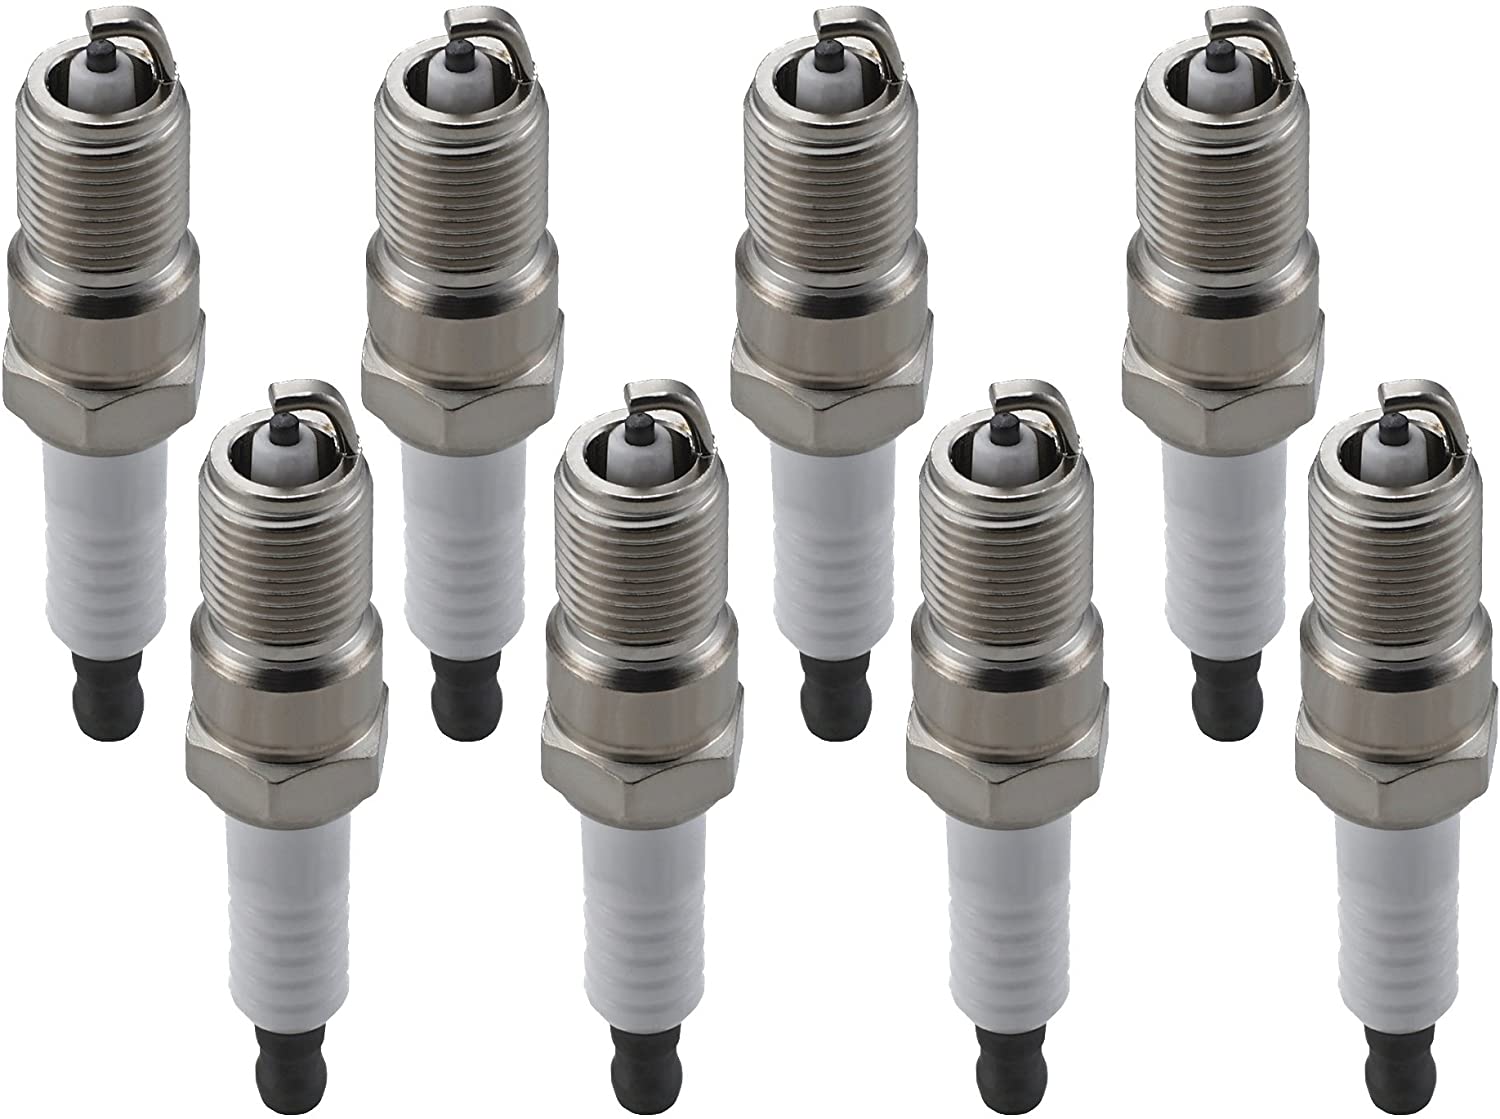 ENA Set of 8 Spark Plugs Compatible with Vin Specific Ford Mercury Lincoln Vehicles 4.6L 5.0L 5.4L V8